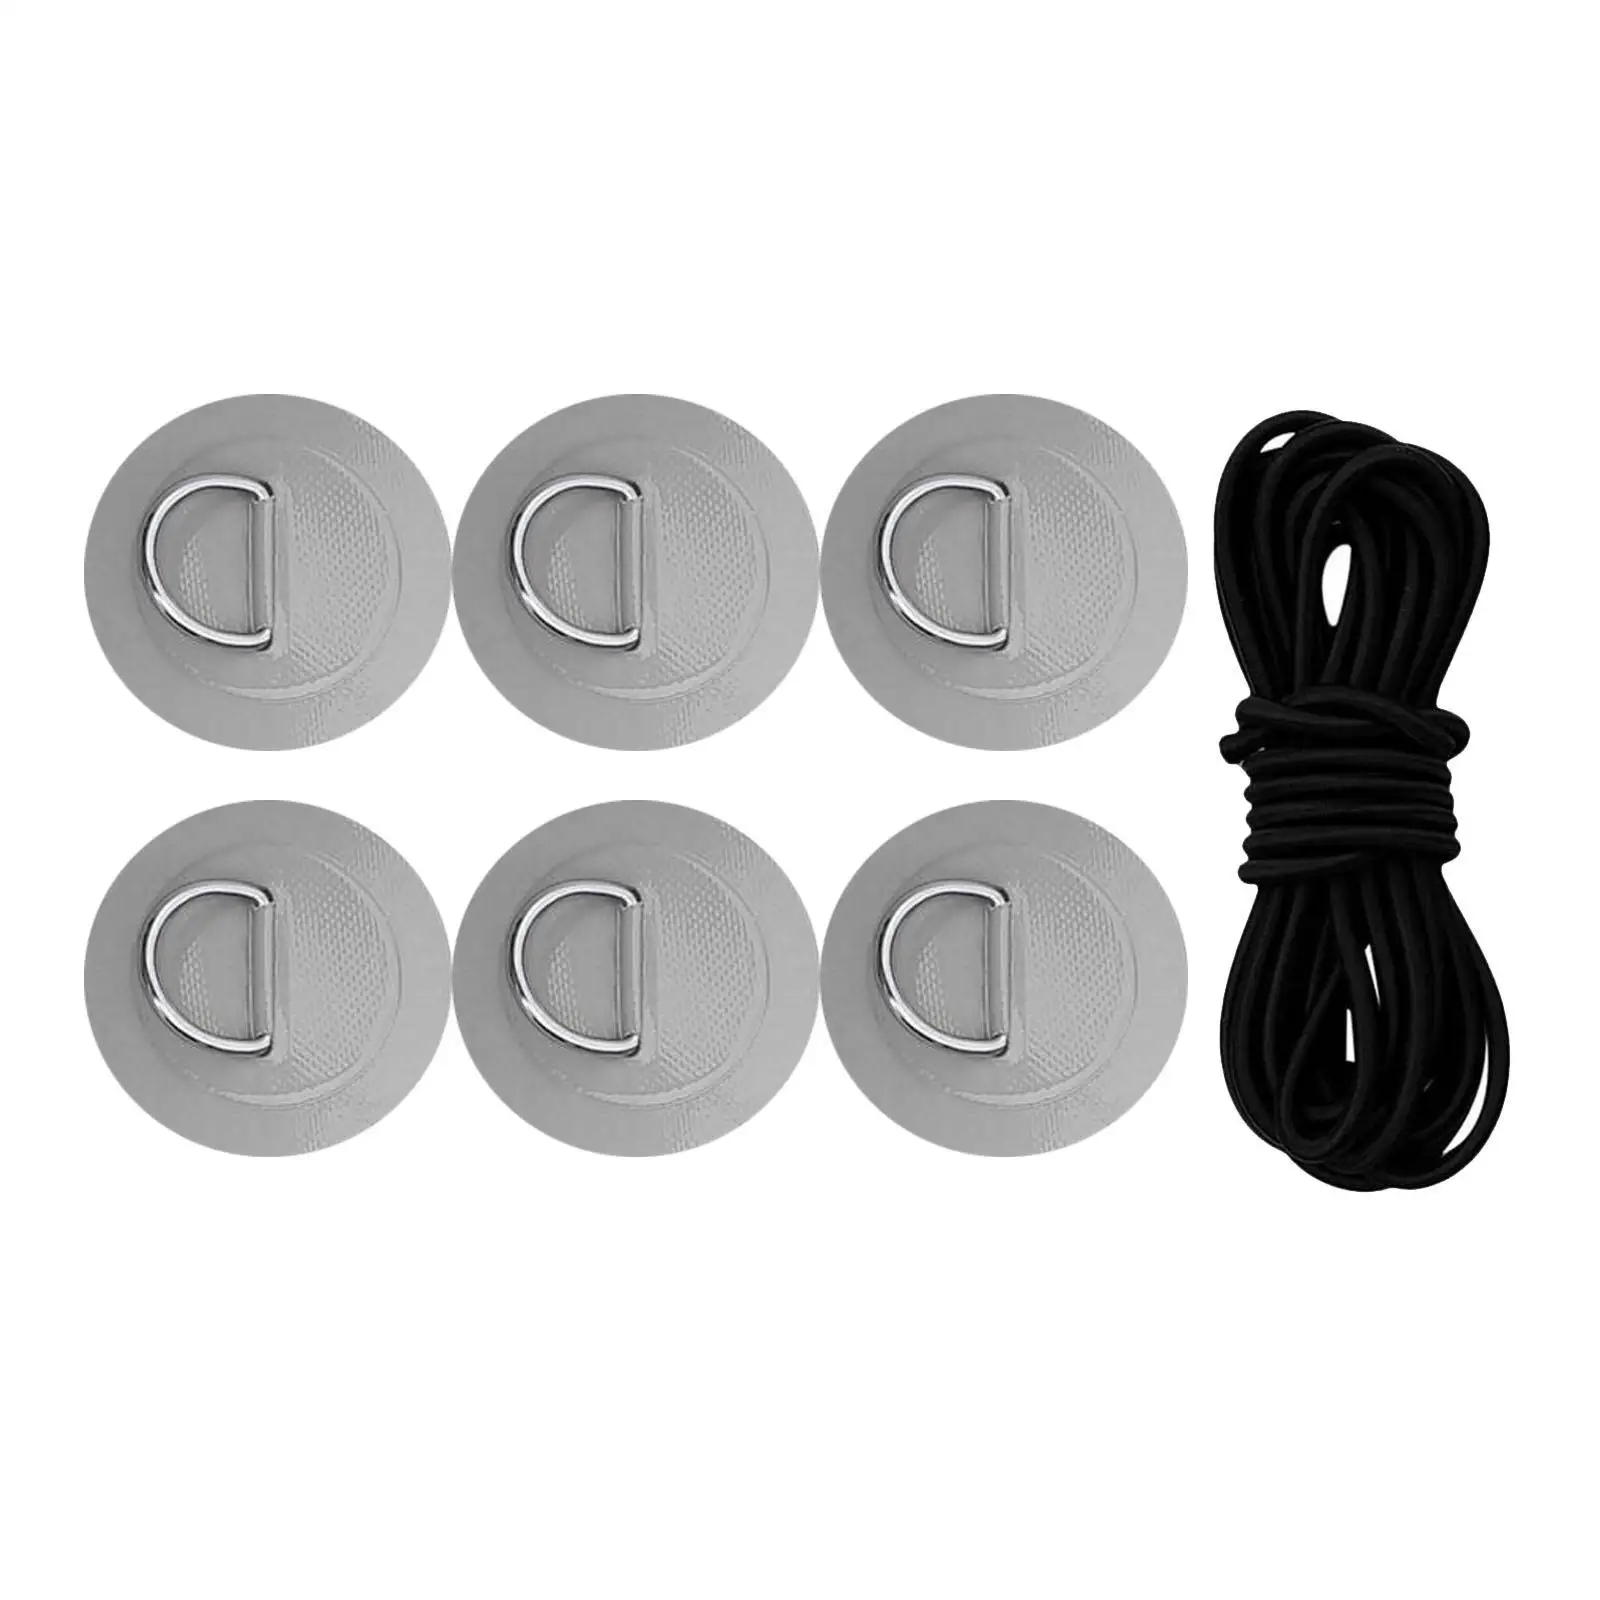 6 Pieces D Rings PVC Patch Deck Rigging Kit for Inflatable Boat Kayak Dinghy